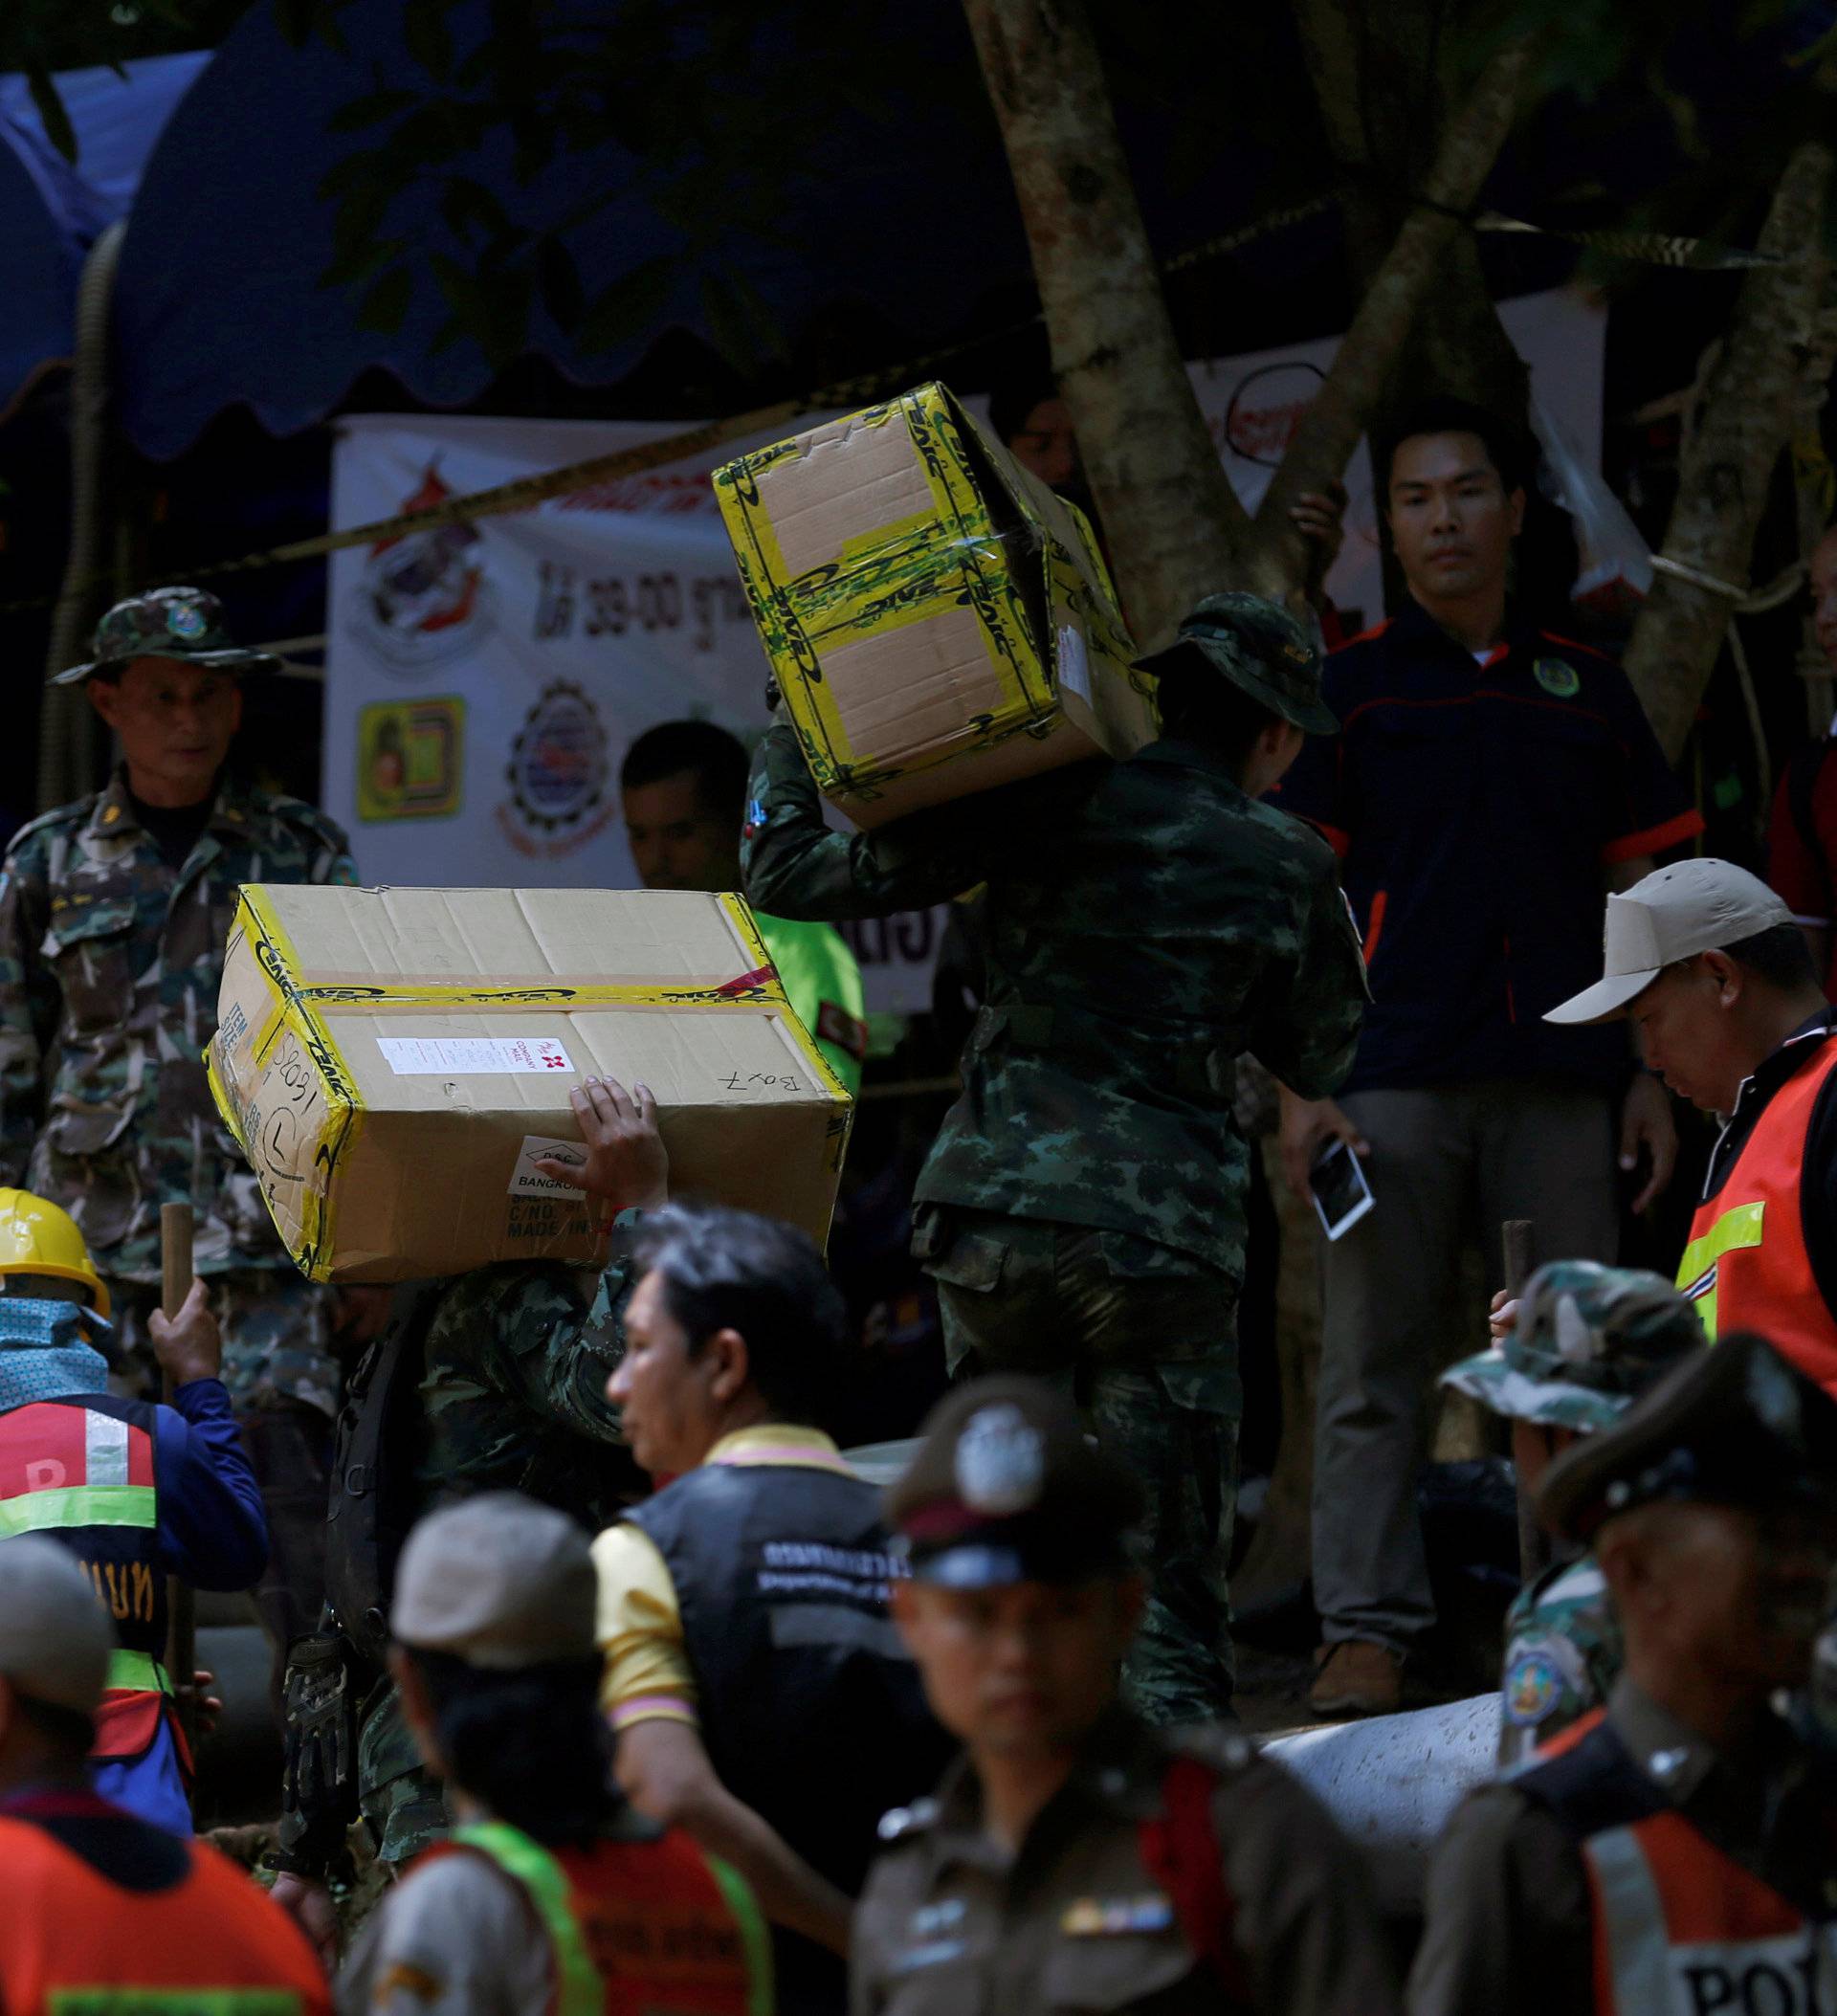 Soldiers and rescue workers carry aid supplies to the Tham Luang cave complex, as members of an under-16 soccer team and their coach have been reported by local media to be found alive, in Chiang Rai